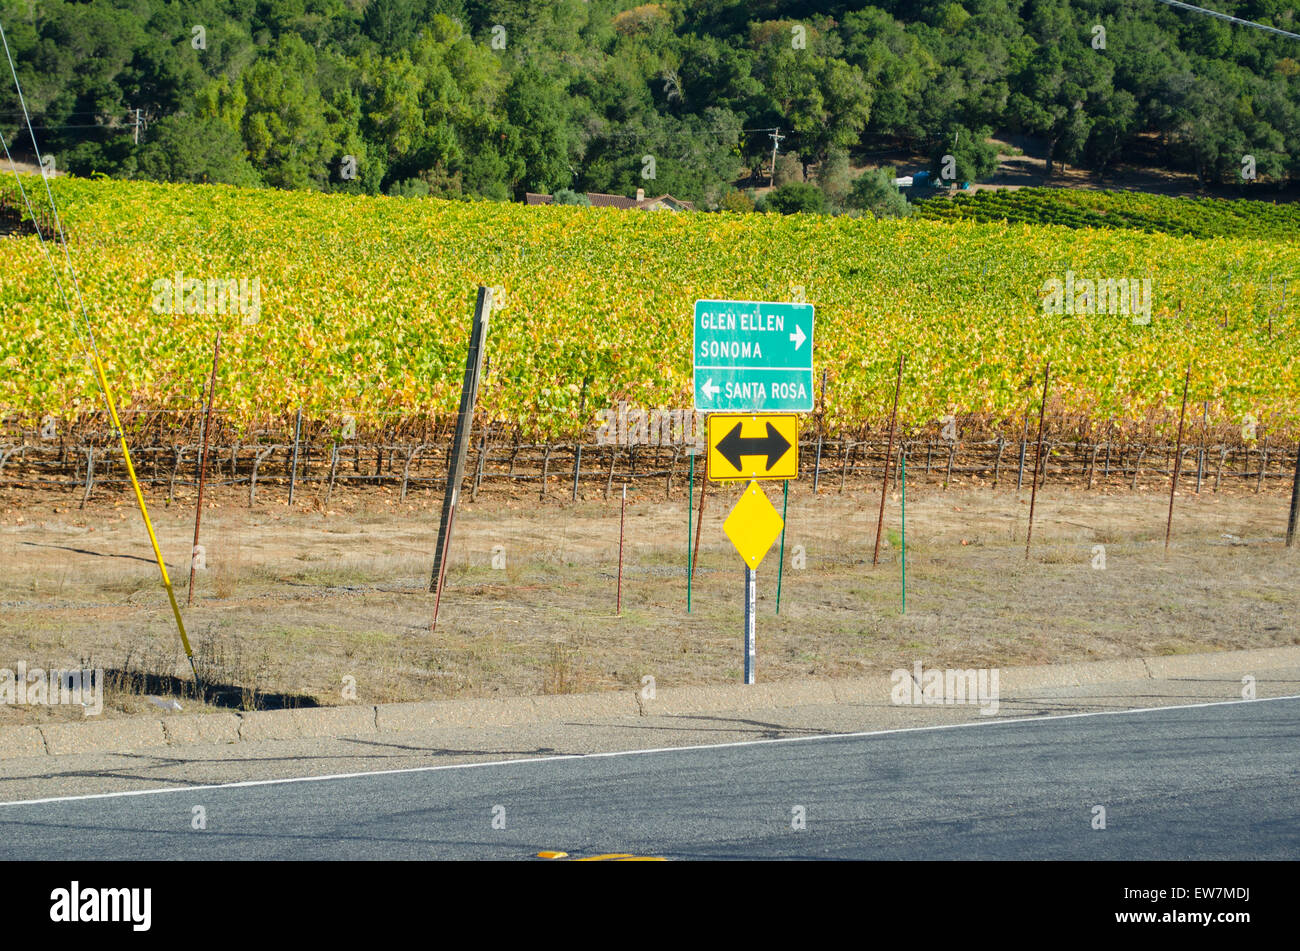 Road sign in Napa County, California with directions to Glen Ellen, Sonoma, and Santa Rosa, grape vineyard in background Stock Photo